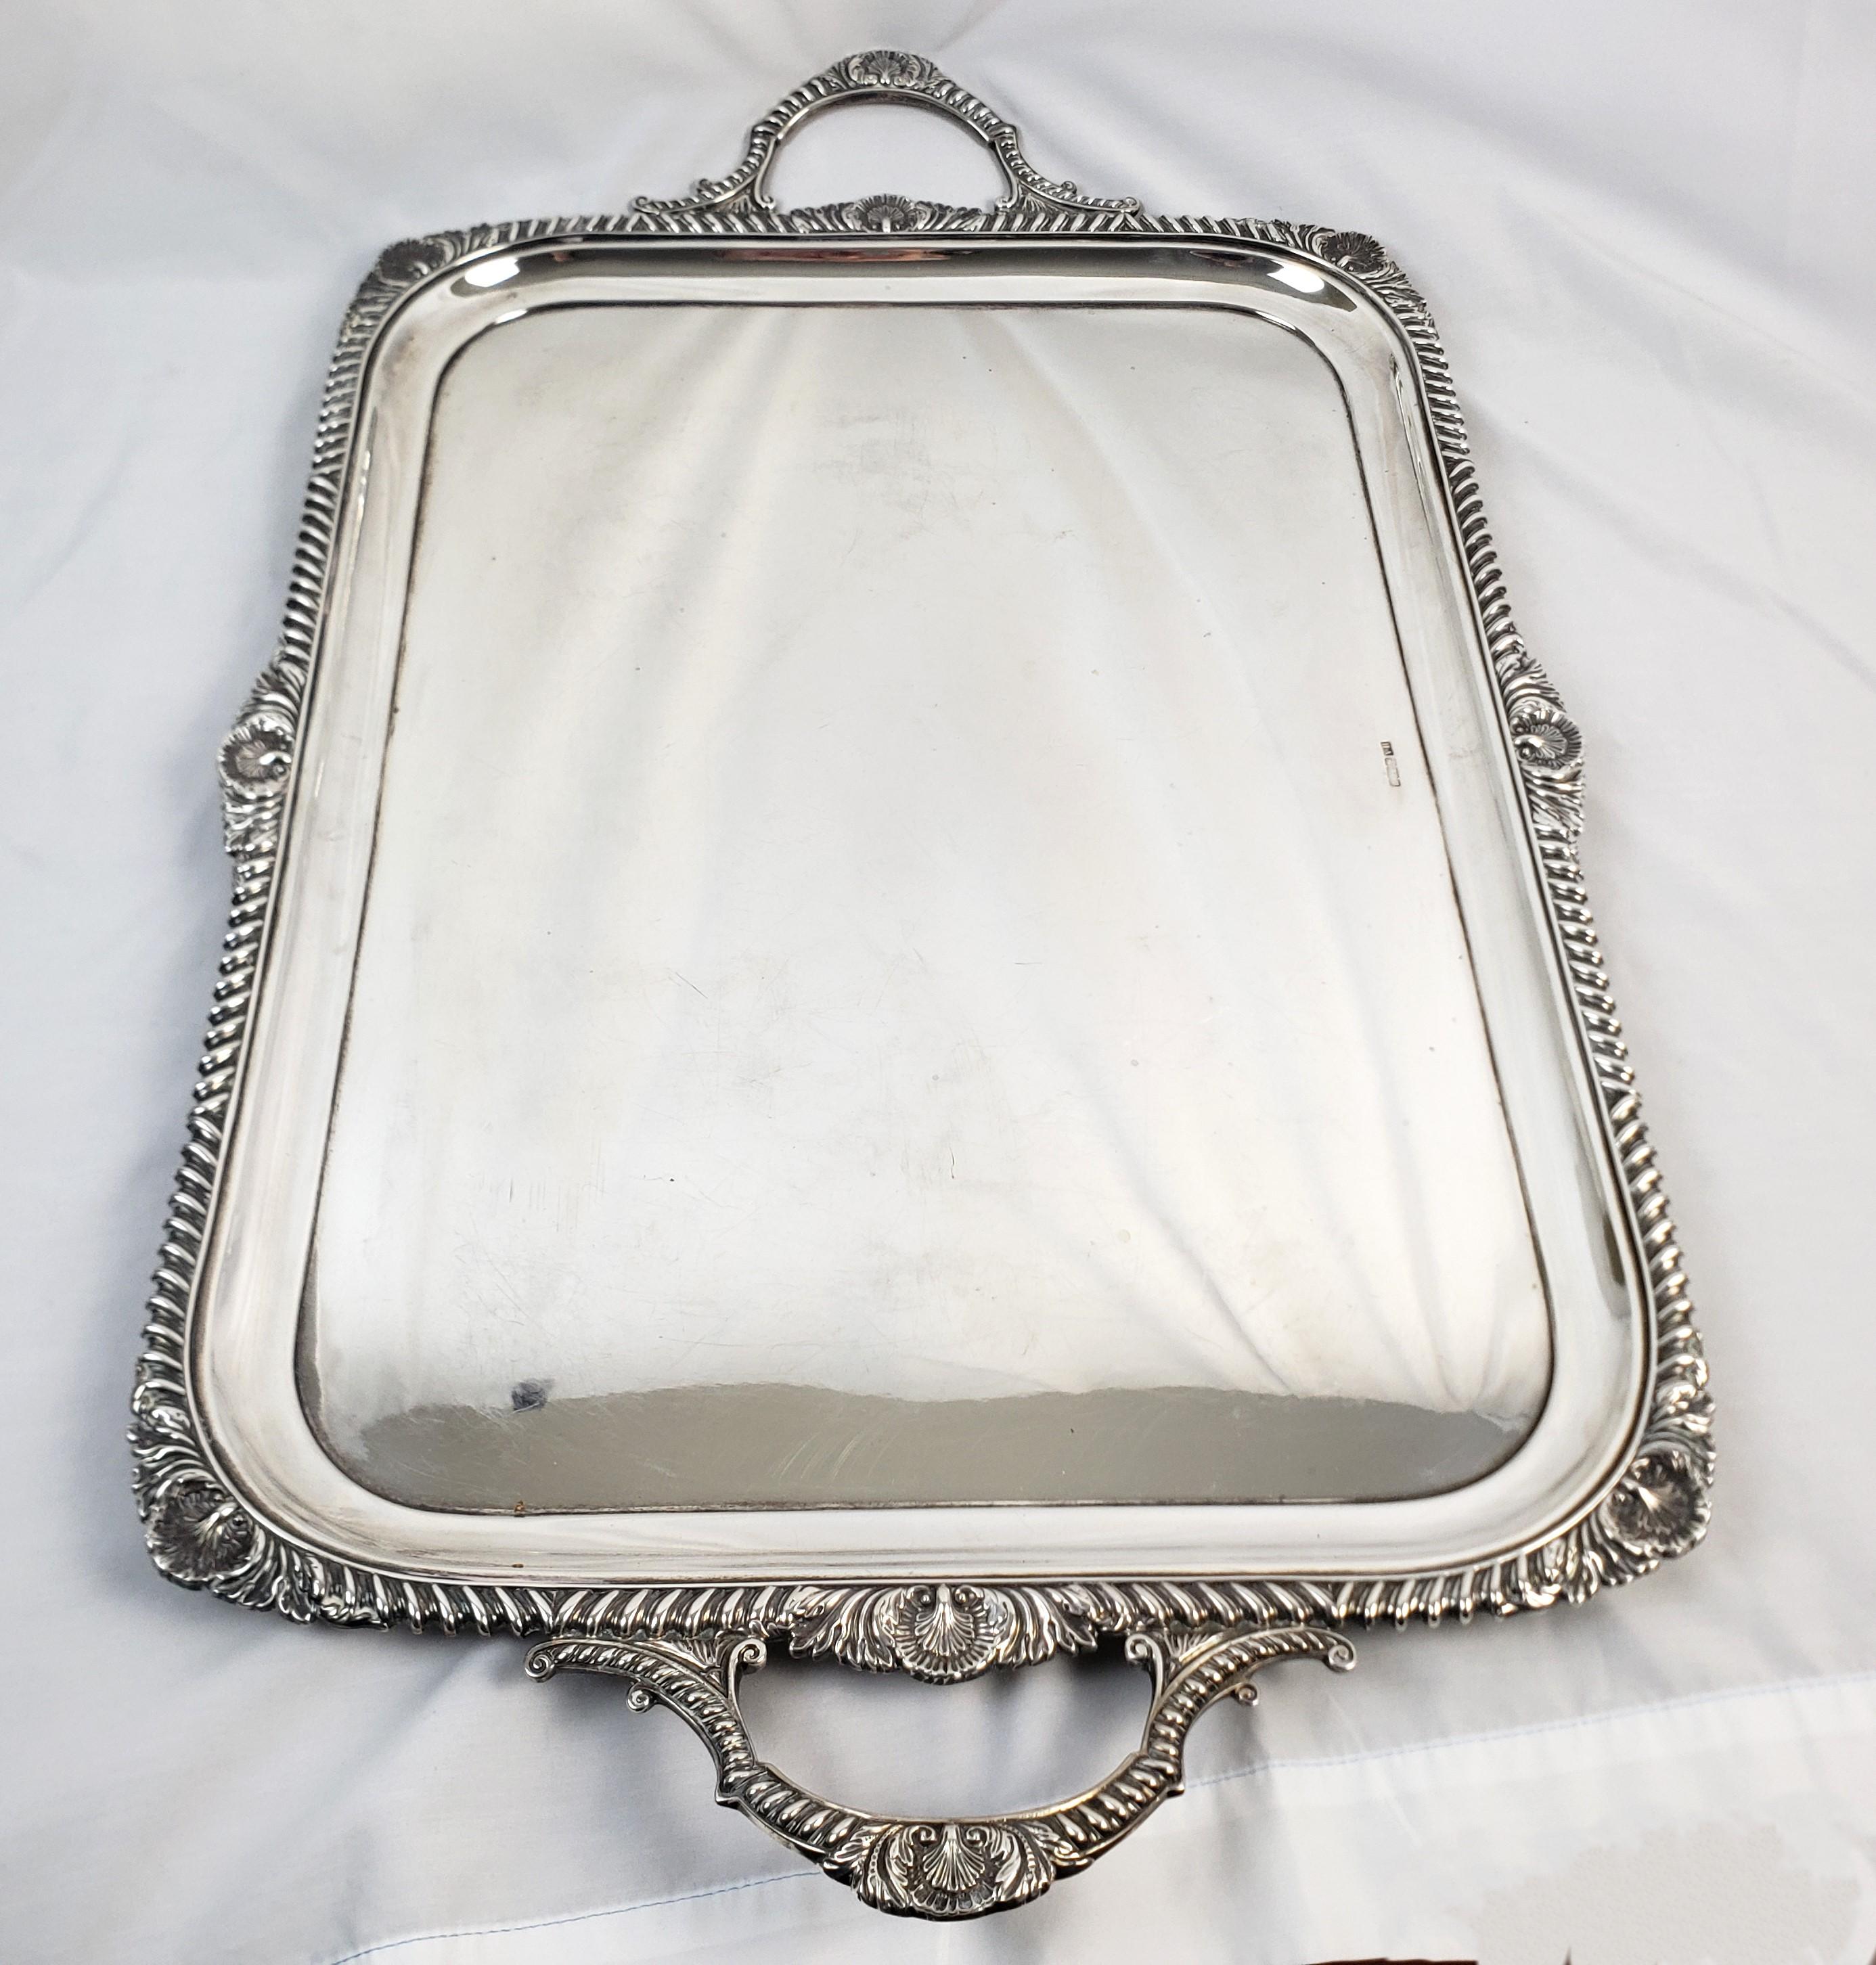 Large Antique Sterling Silver Edwardian Serving Tray with Stylized Rope Border In Good Condition For Sale In Hamilton, Ontario